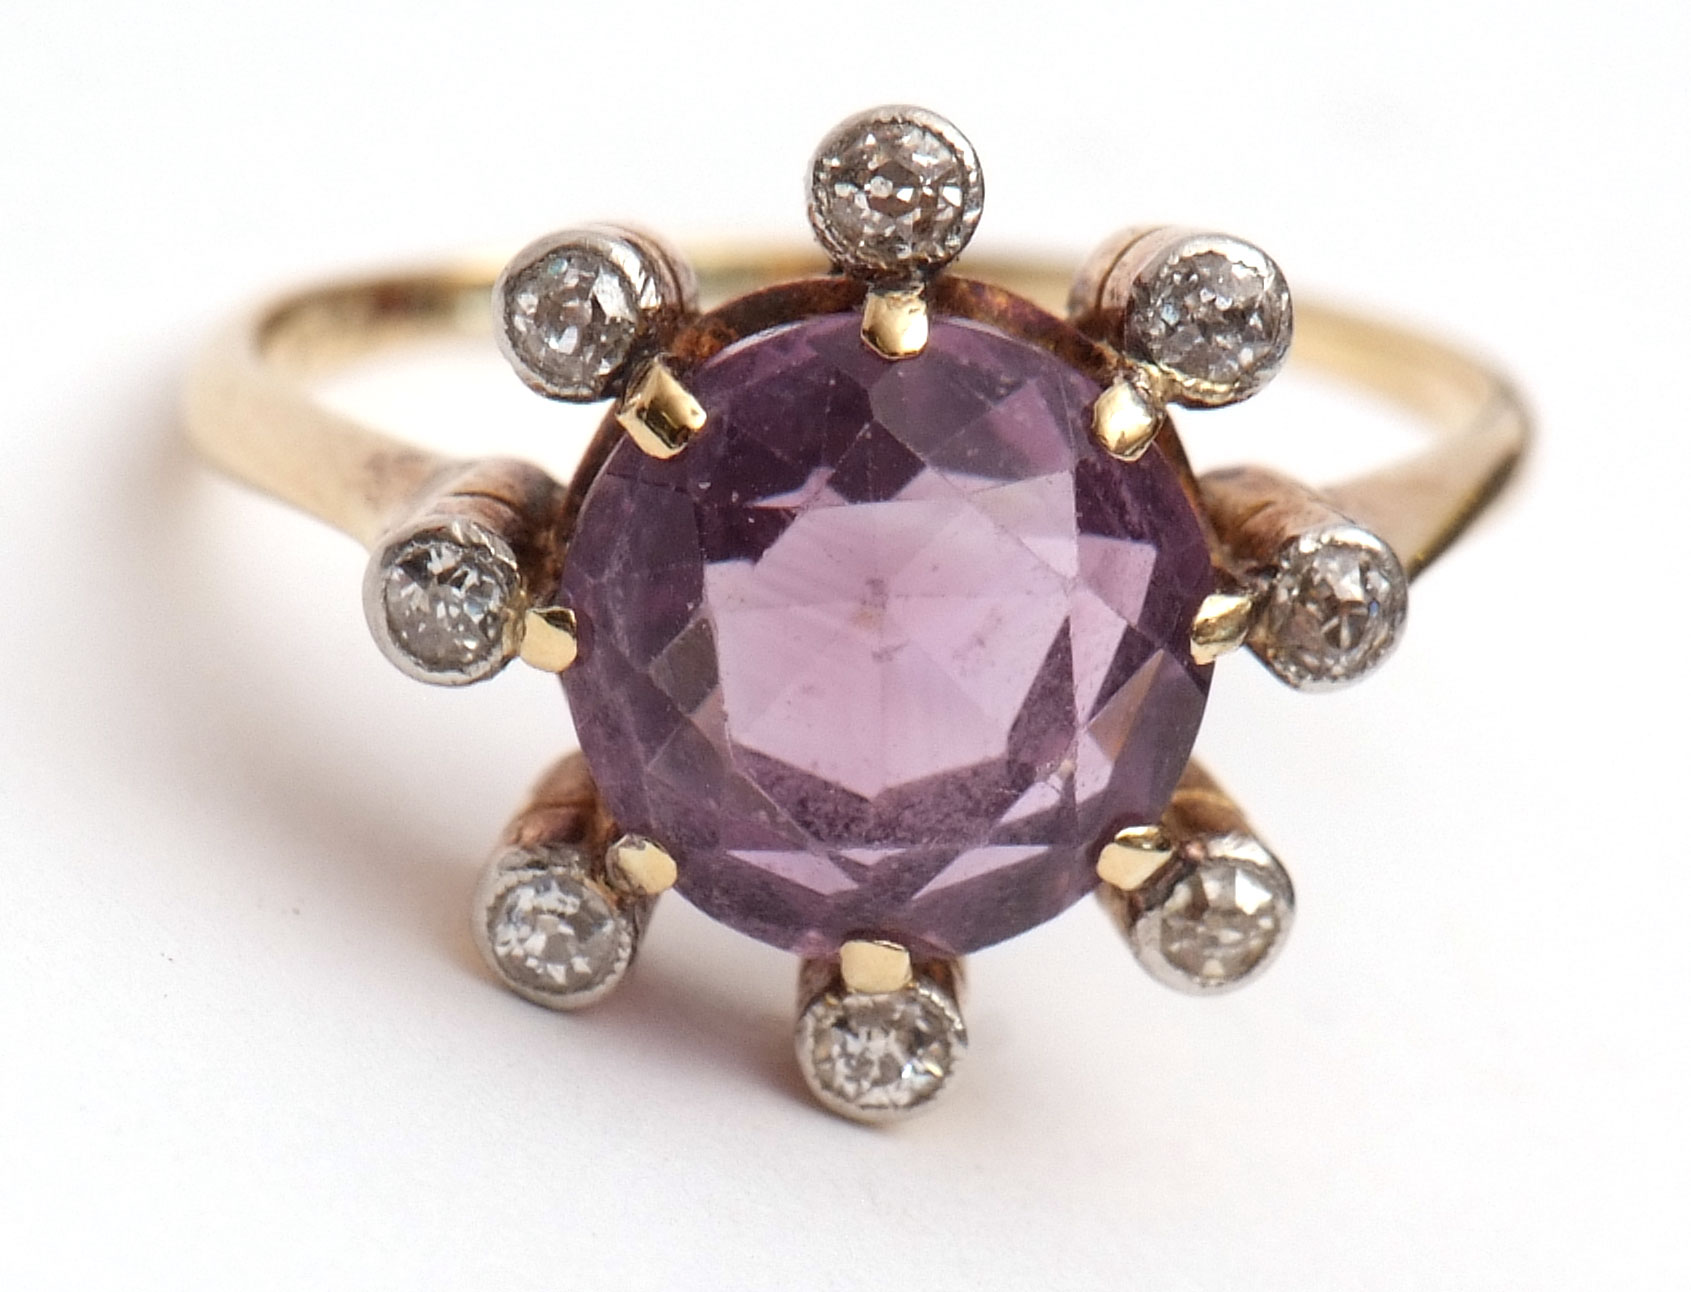 Precious metal amethyst and diamond ring, the circular-shaped amethyst is within a surround of 8